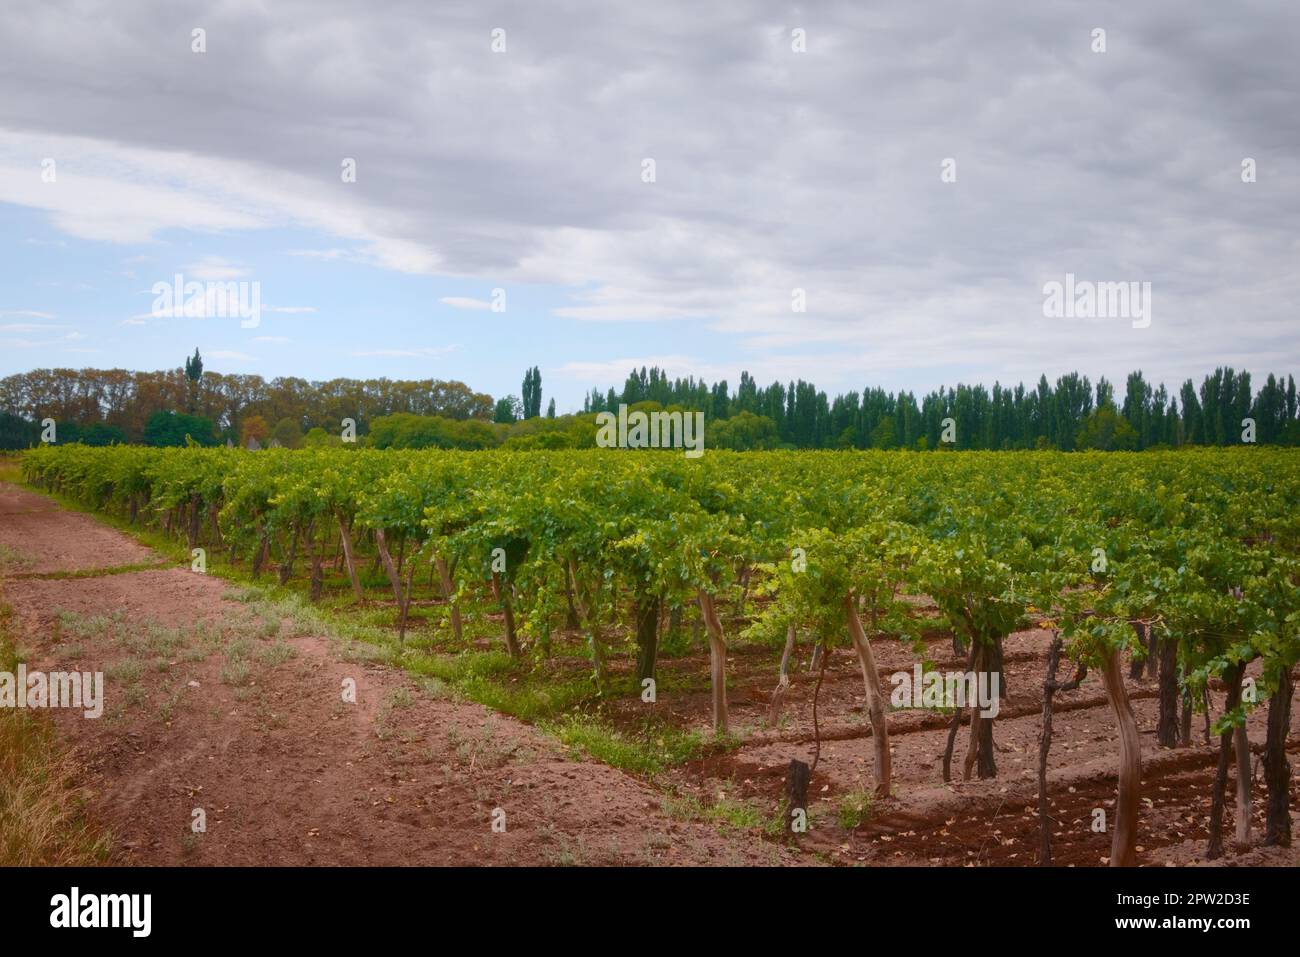 Grapevine rows at a vineyard estate in Mendoza, Argentina. Wine industry, agriculture background. Stock Photo